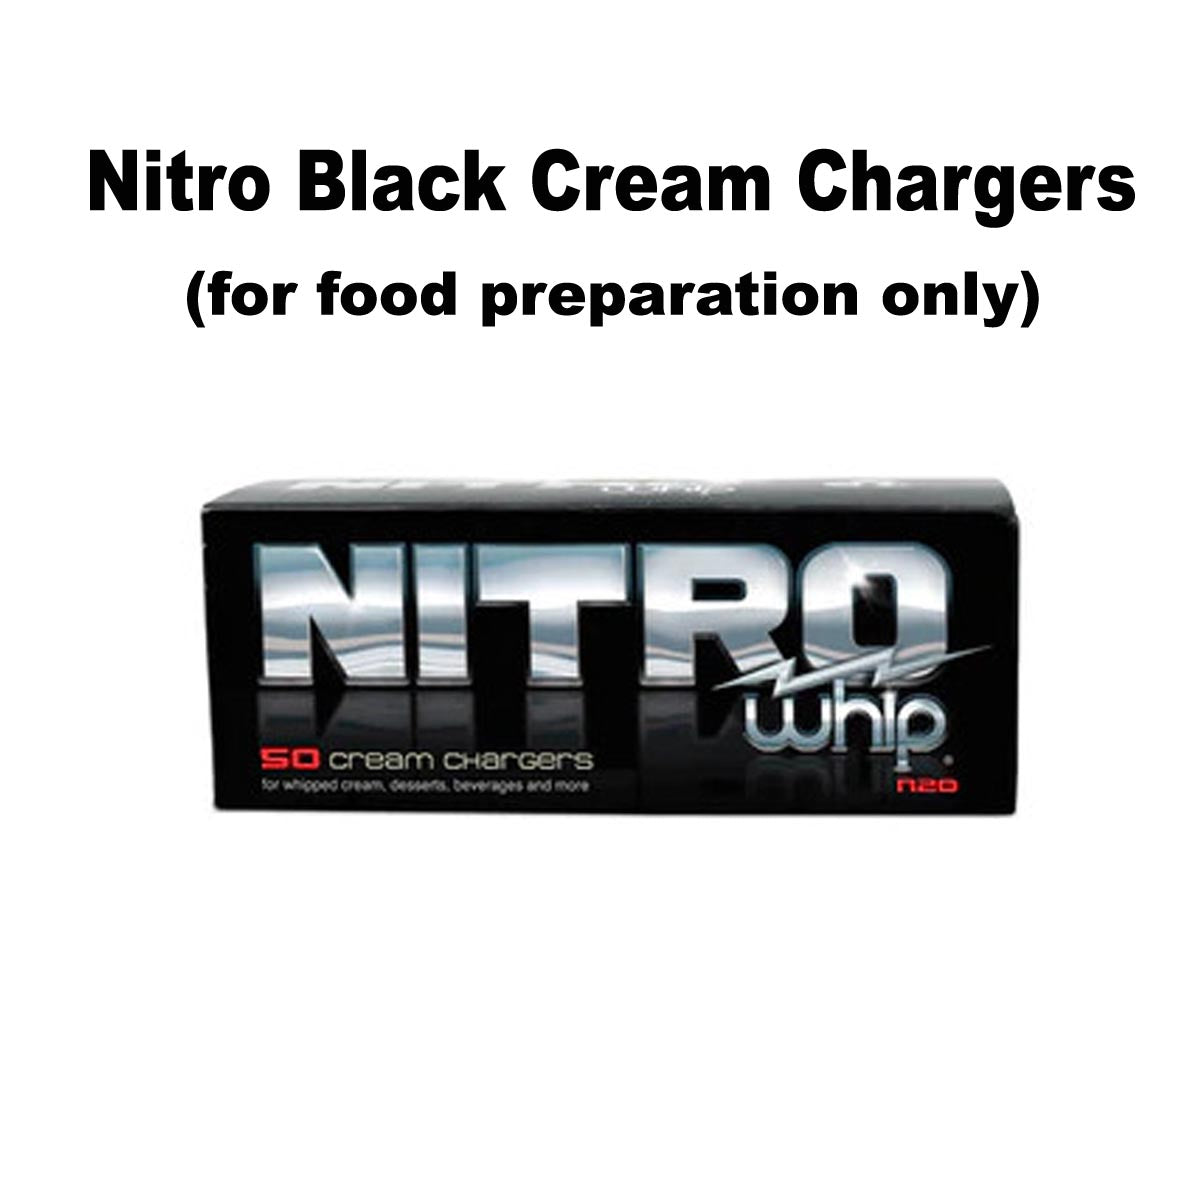 Nitro Black Cream Chargers (for food preparation only)